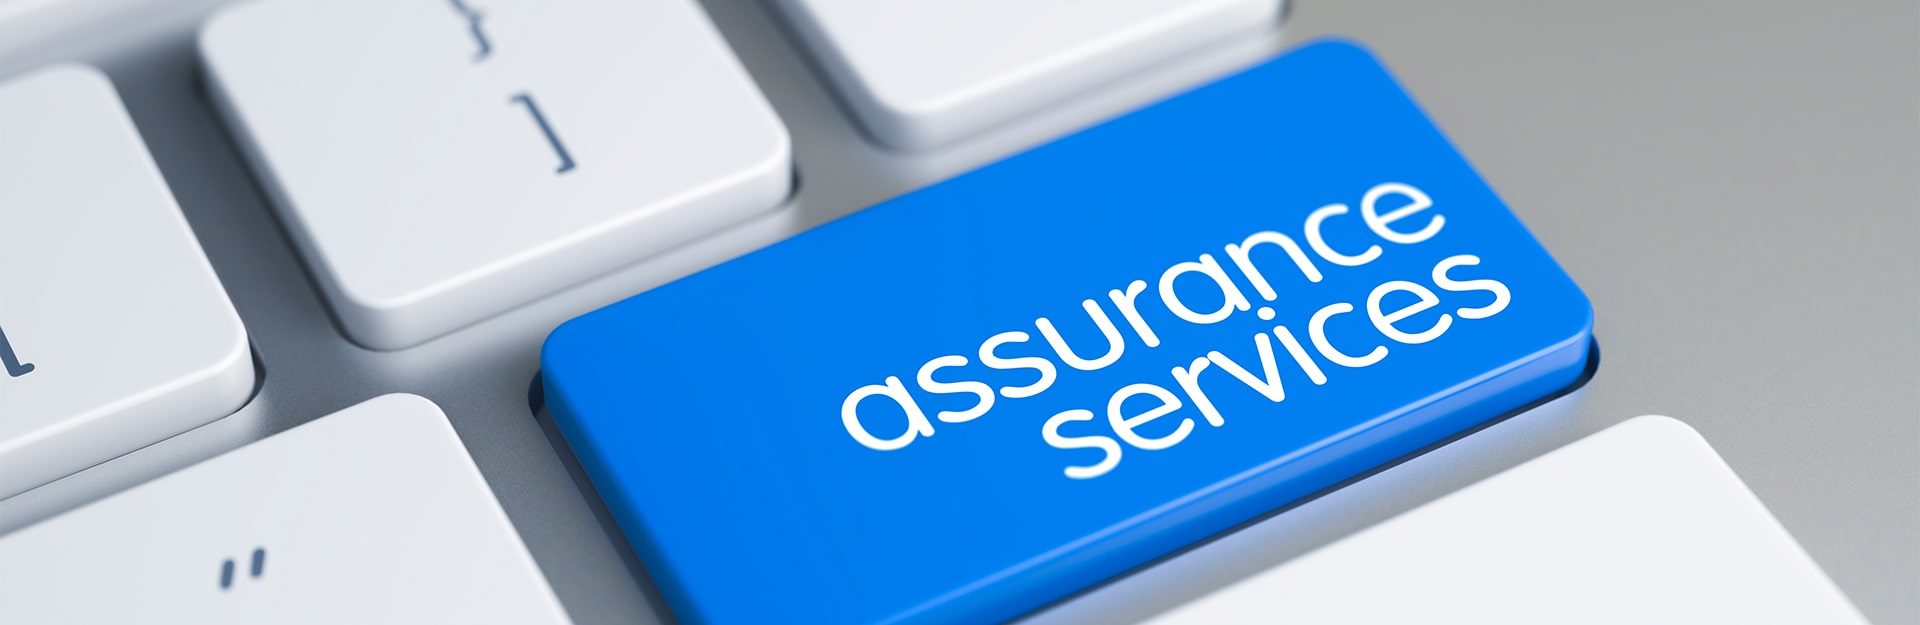 Assurance/Auditing Services